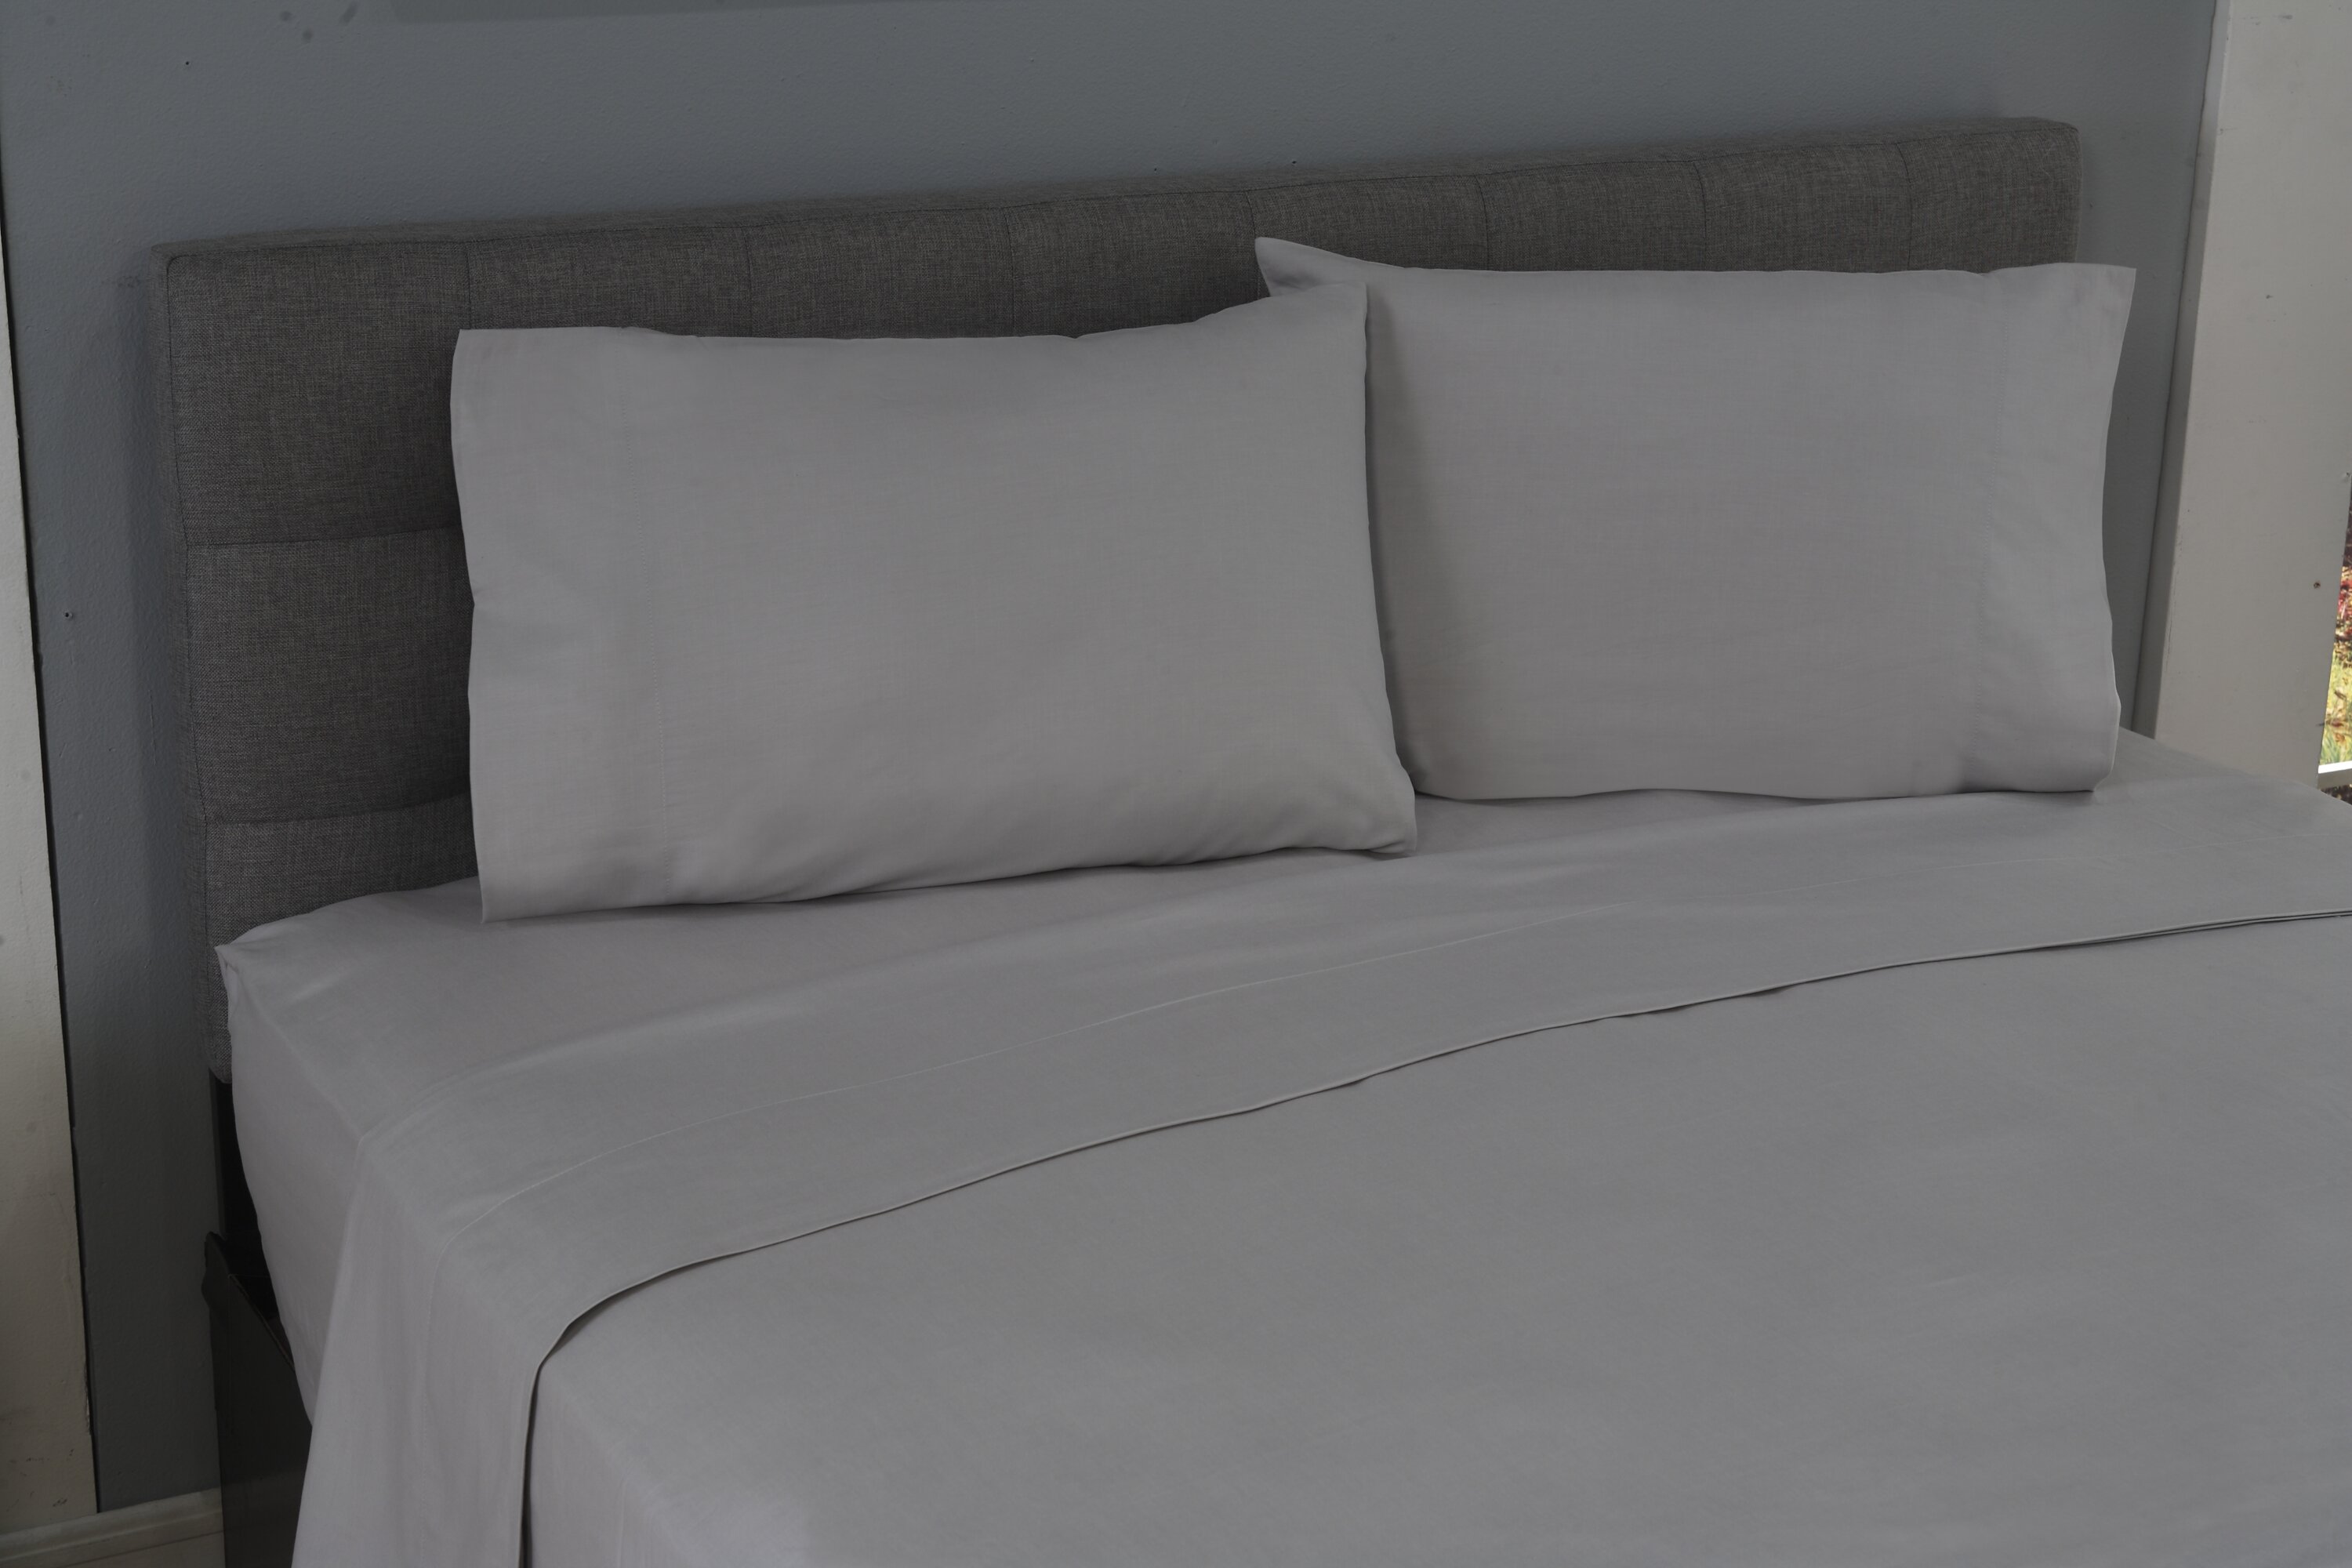 LUXURY 200 TC THREAD COUNT HOTEL QUALITY PURE 100%COTTON FLAT SHEET WHITE DOUBLE 